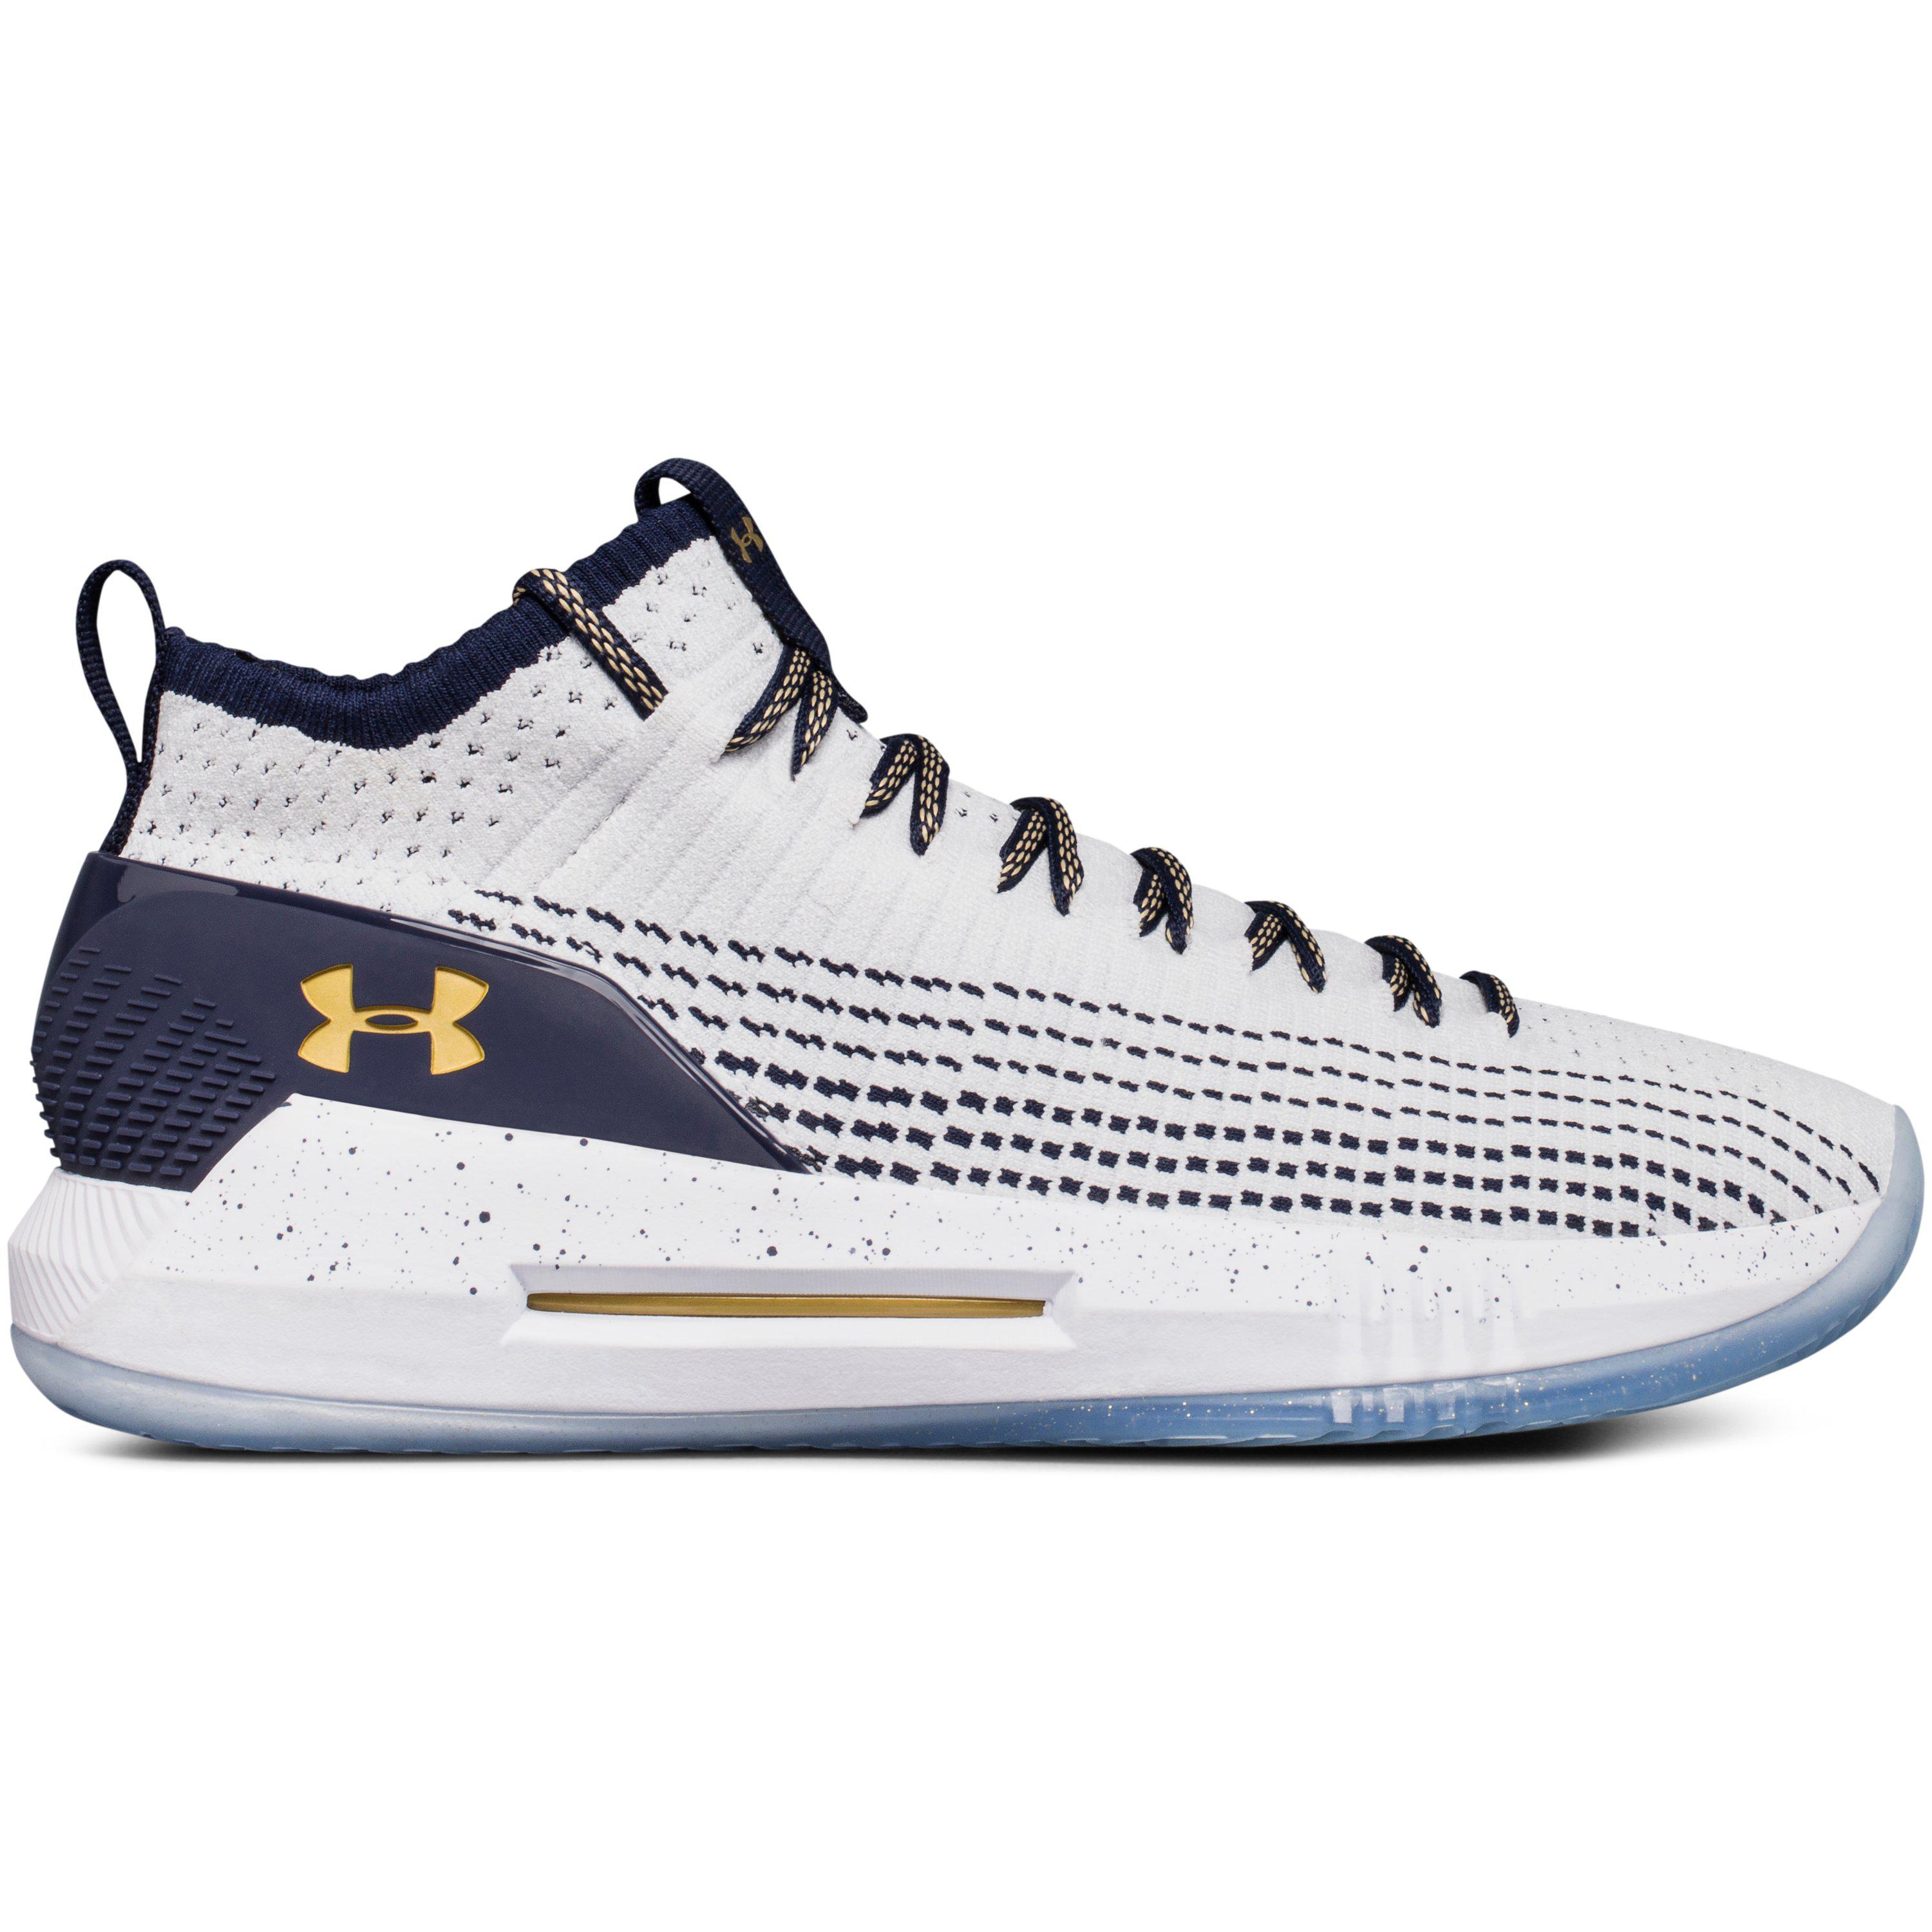 Under Armour Synthetic Men's Ua Heat Seeker Basketball Shoes in White ...